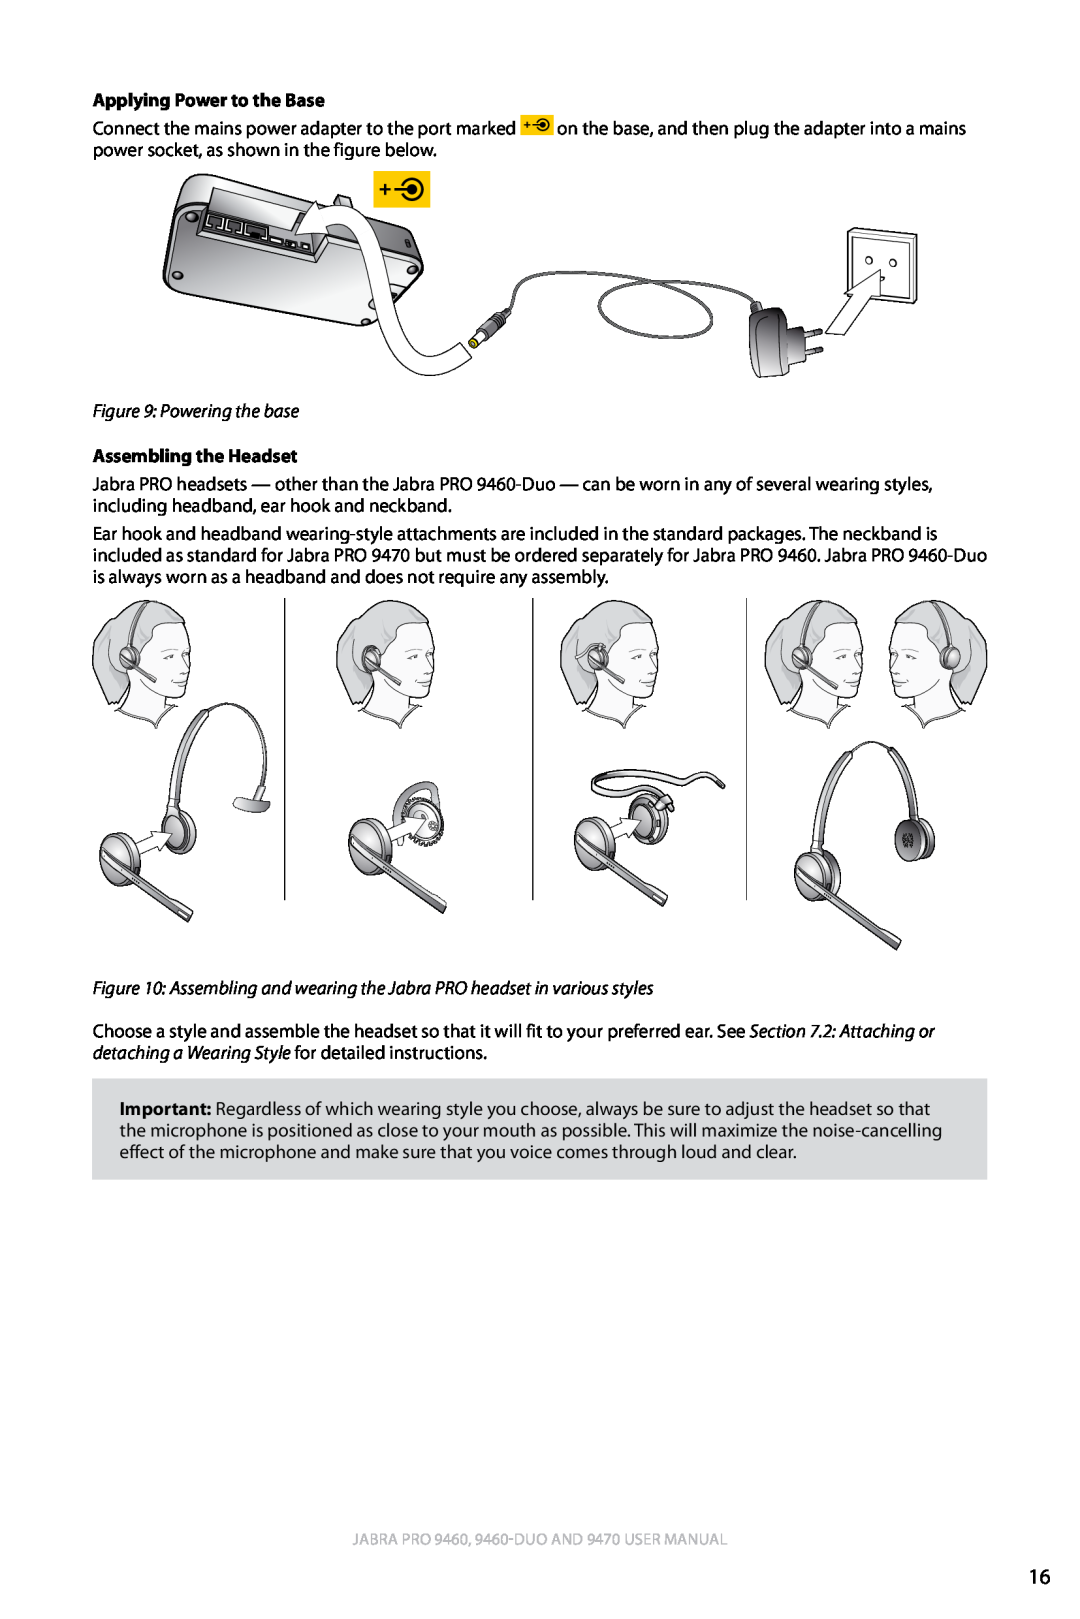 Lennox Hearth 9470 user manual english, Applying Power to the Base, Assembling the Headset 